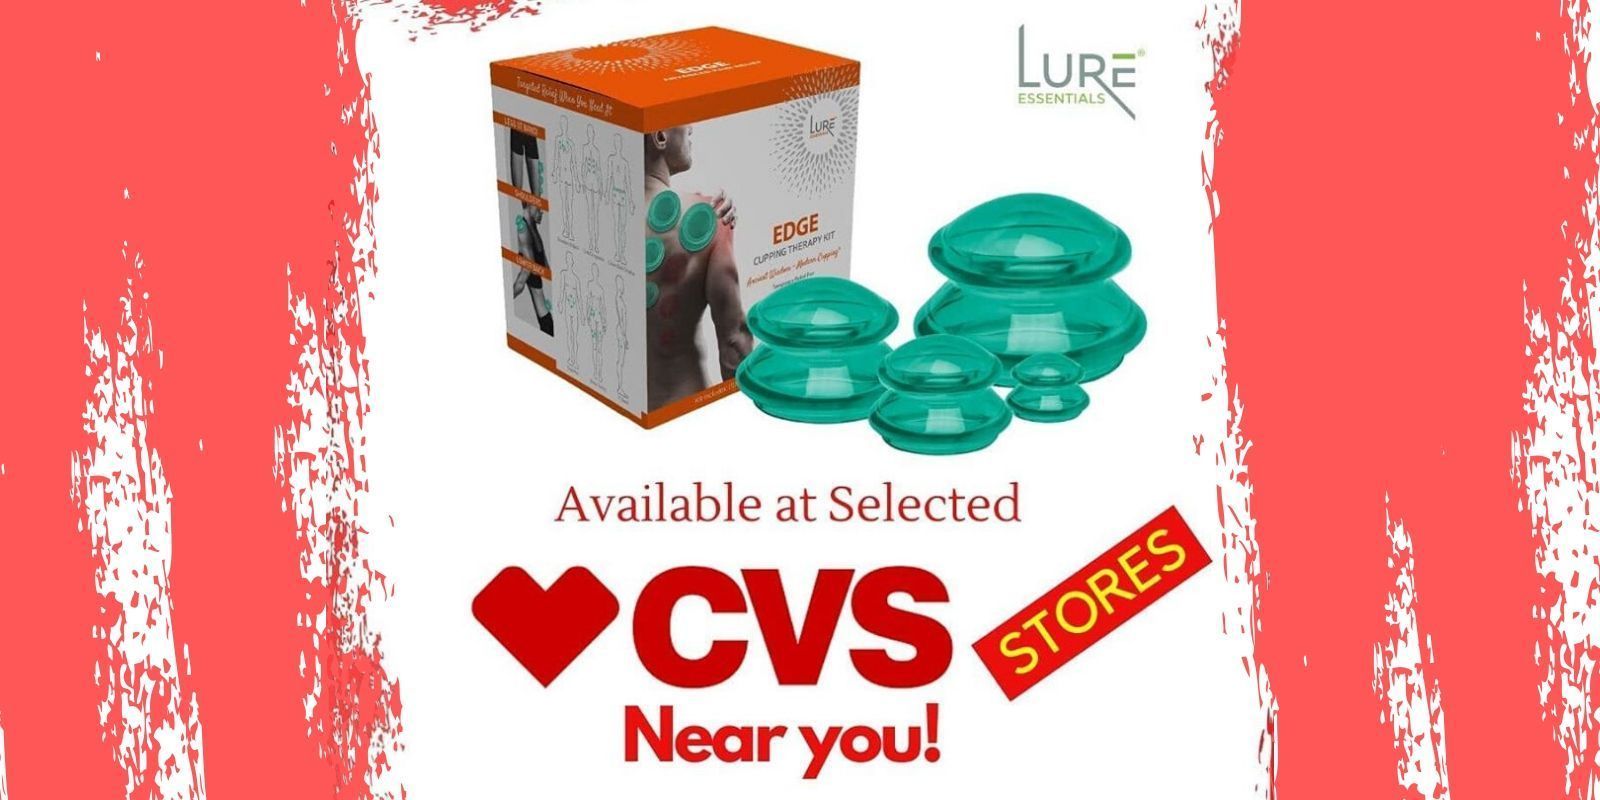 Lure Essentials Takes Cupping Therapy Mainstream with Launch at CVS Stores - Lure Essentials